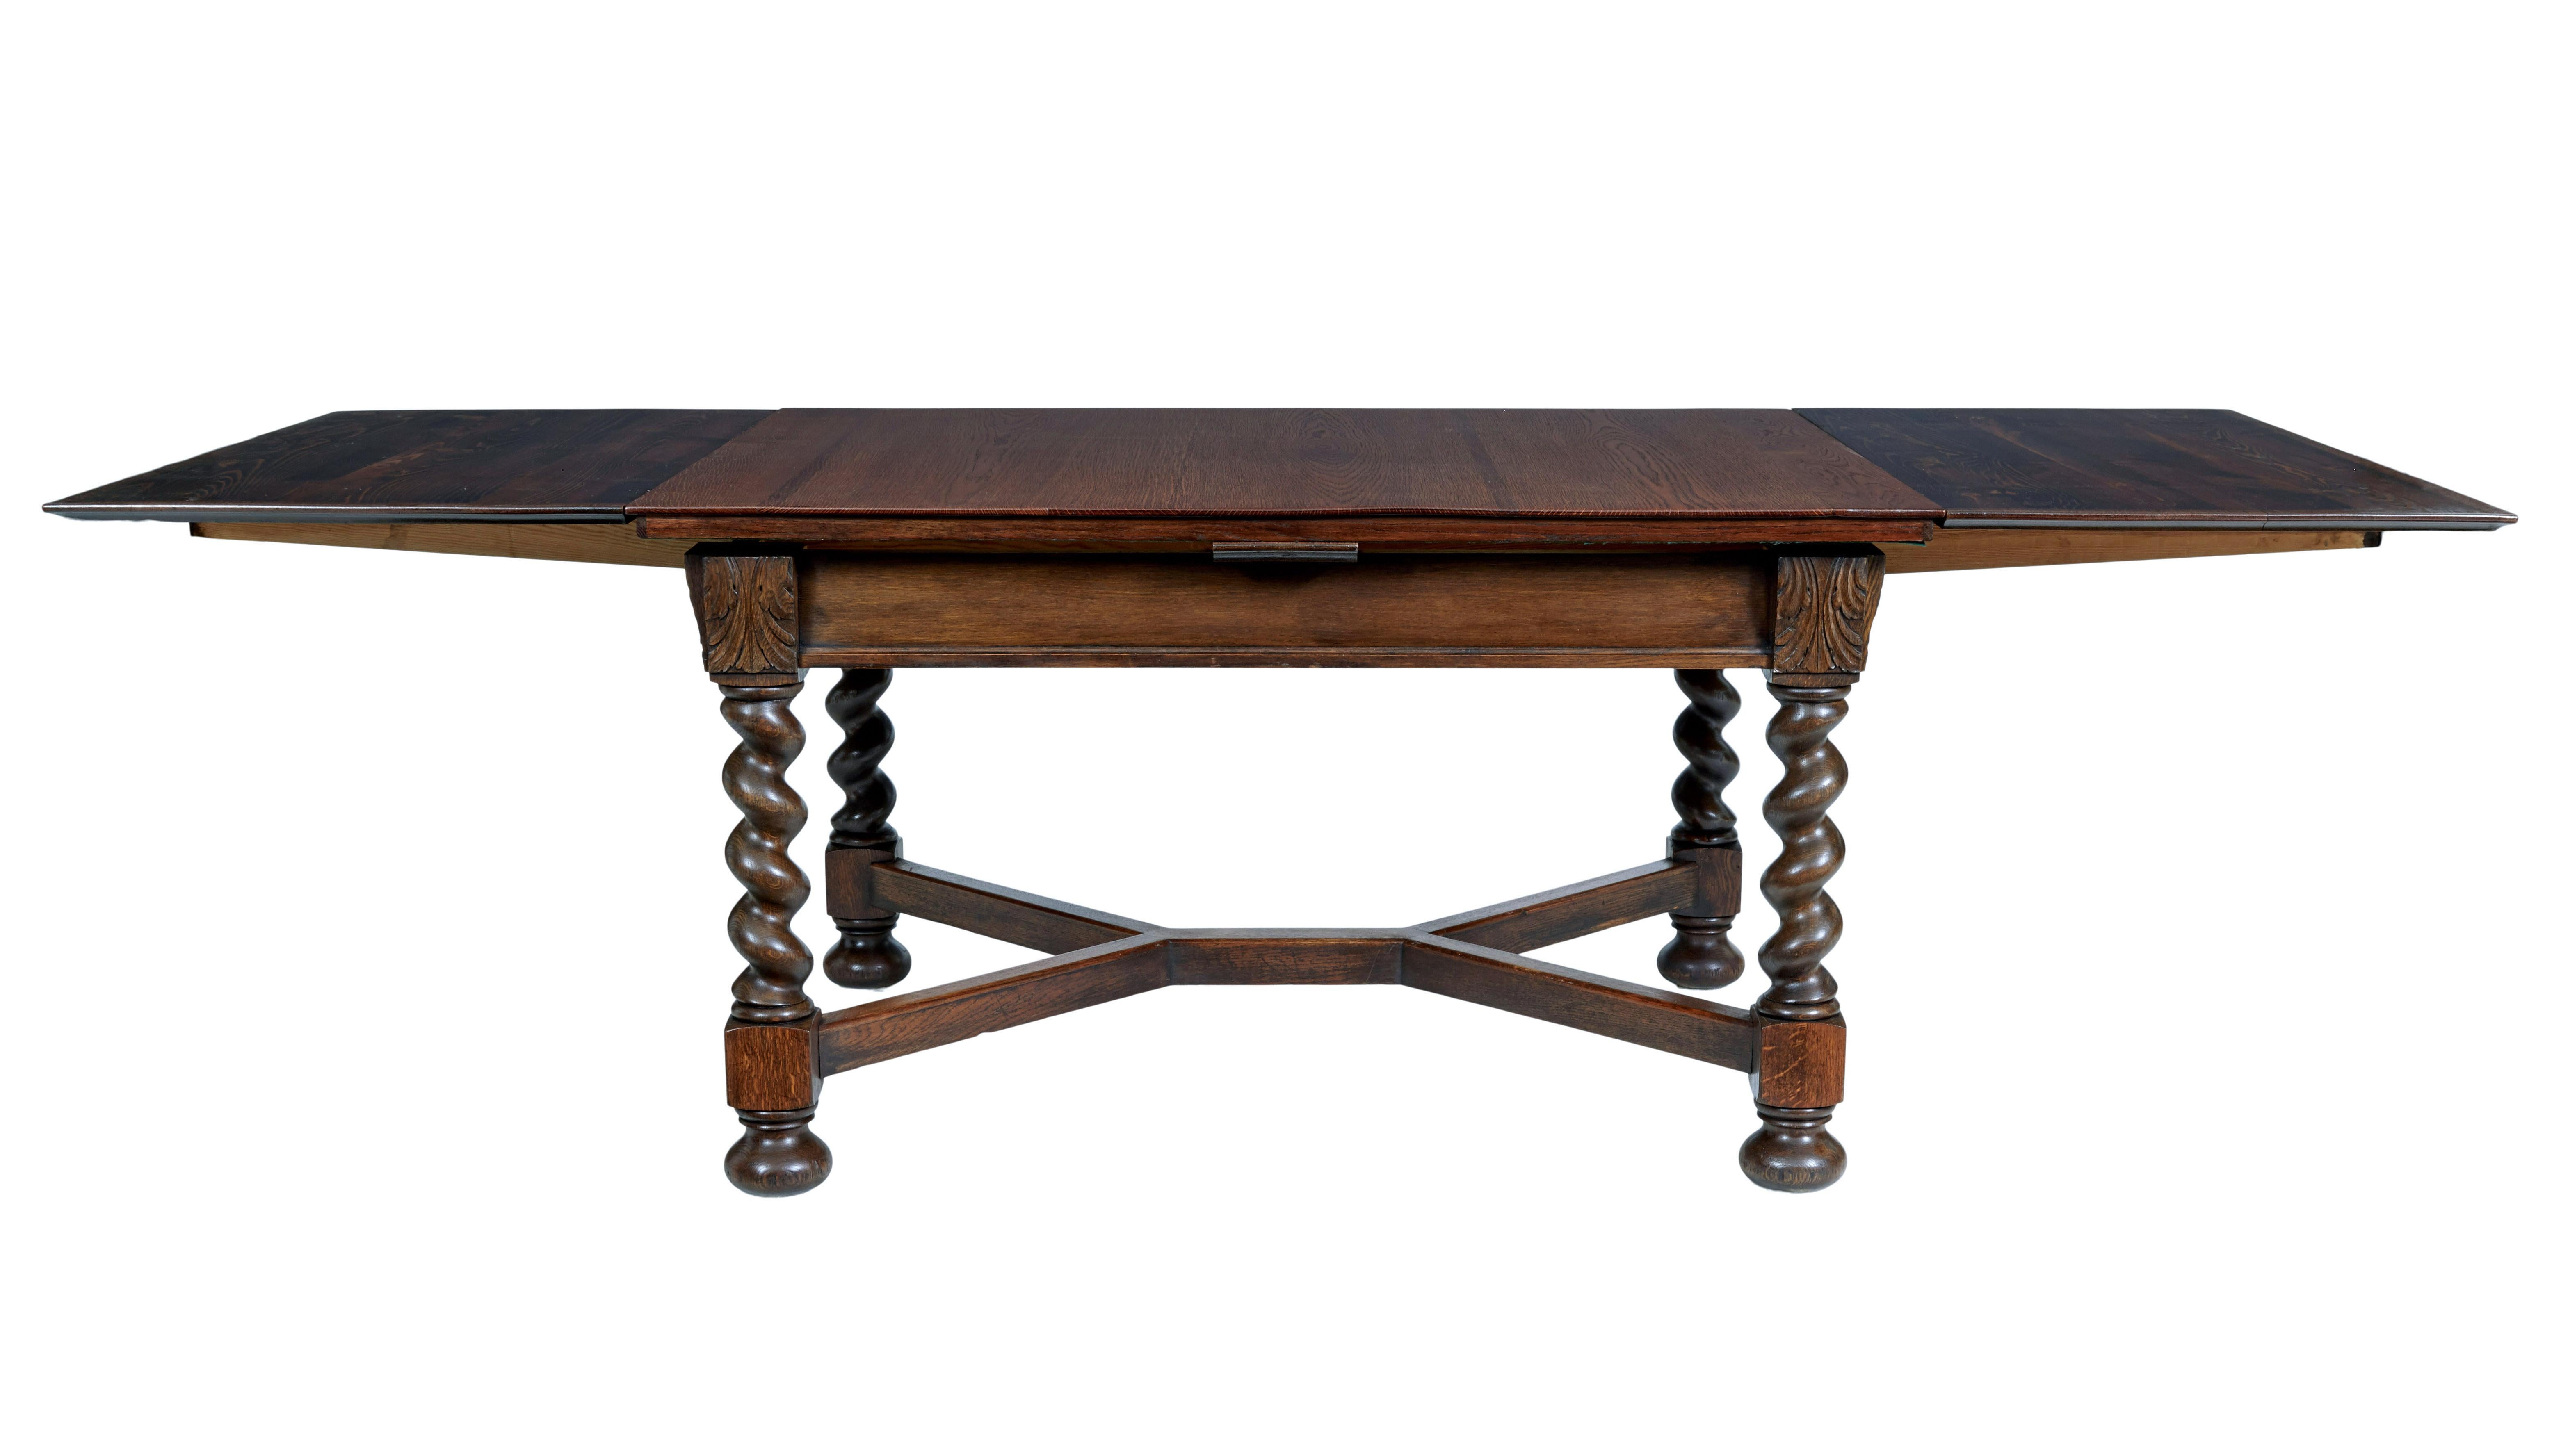 Baroque Revival Early 20th Century baroque revival oak extending dining table For Sale